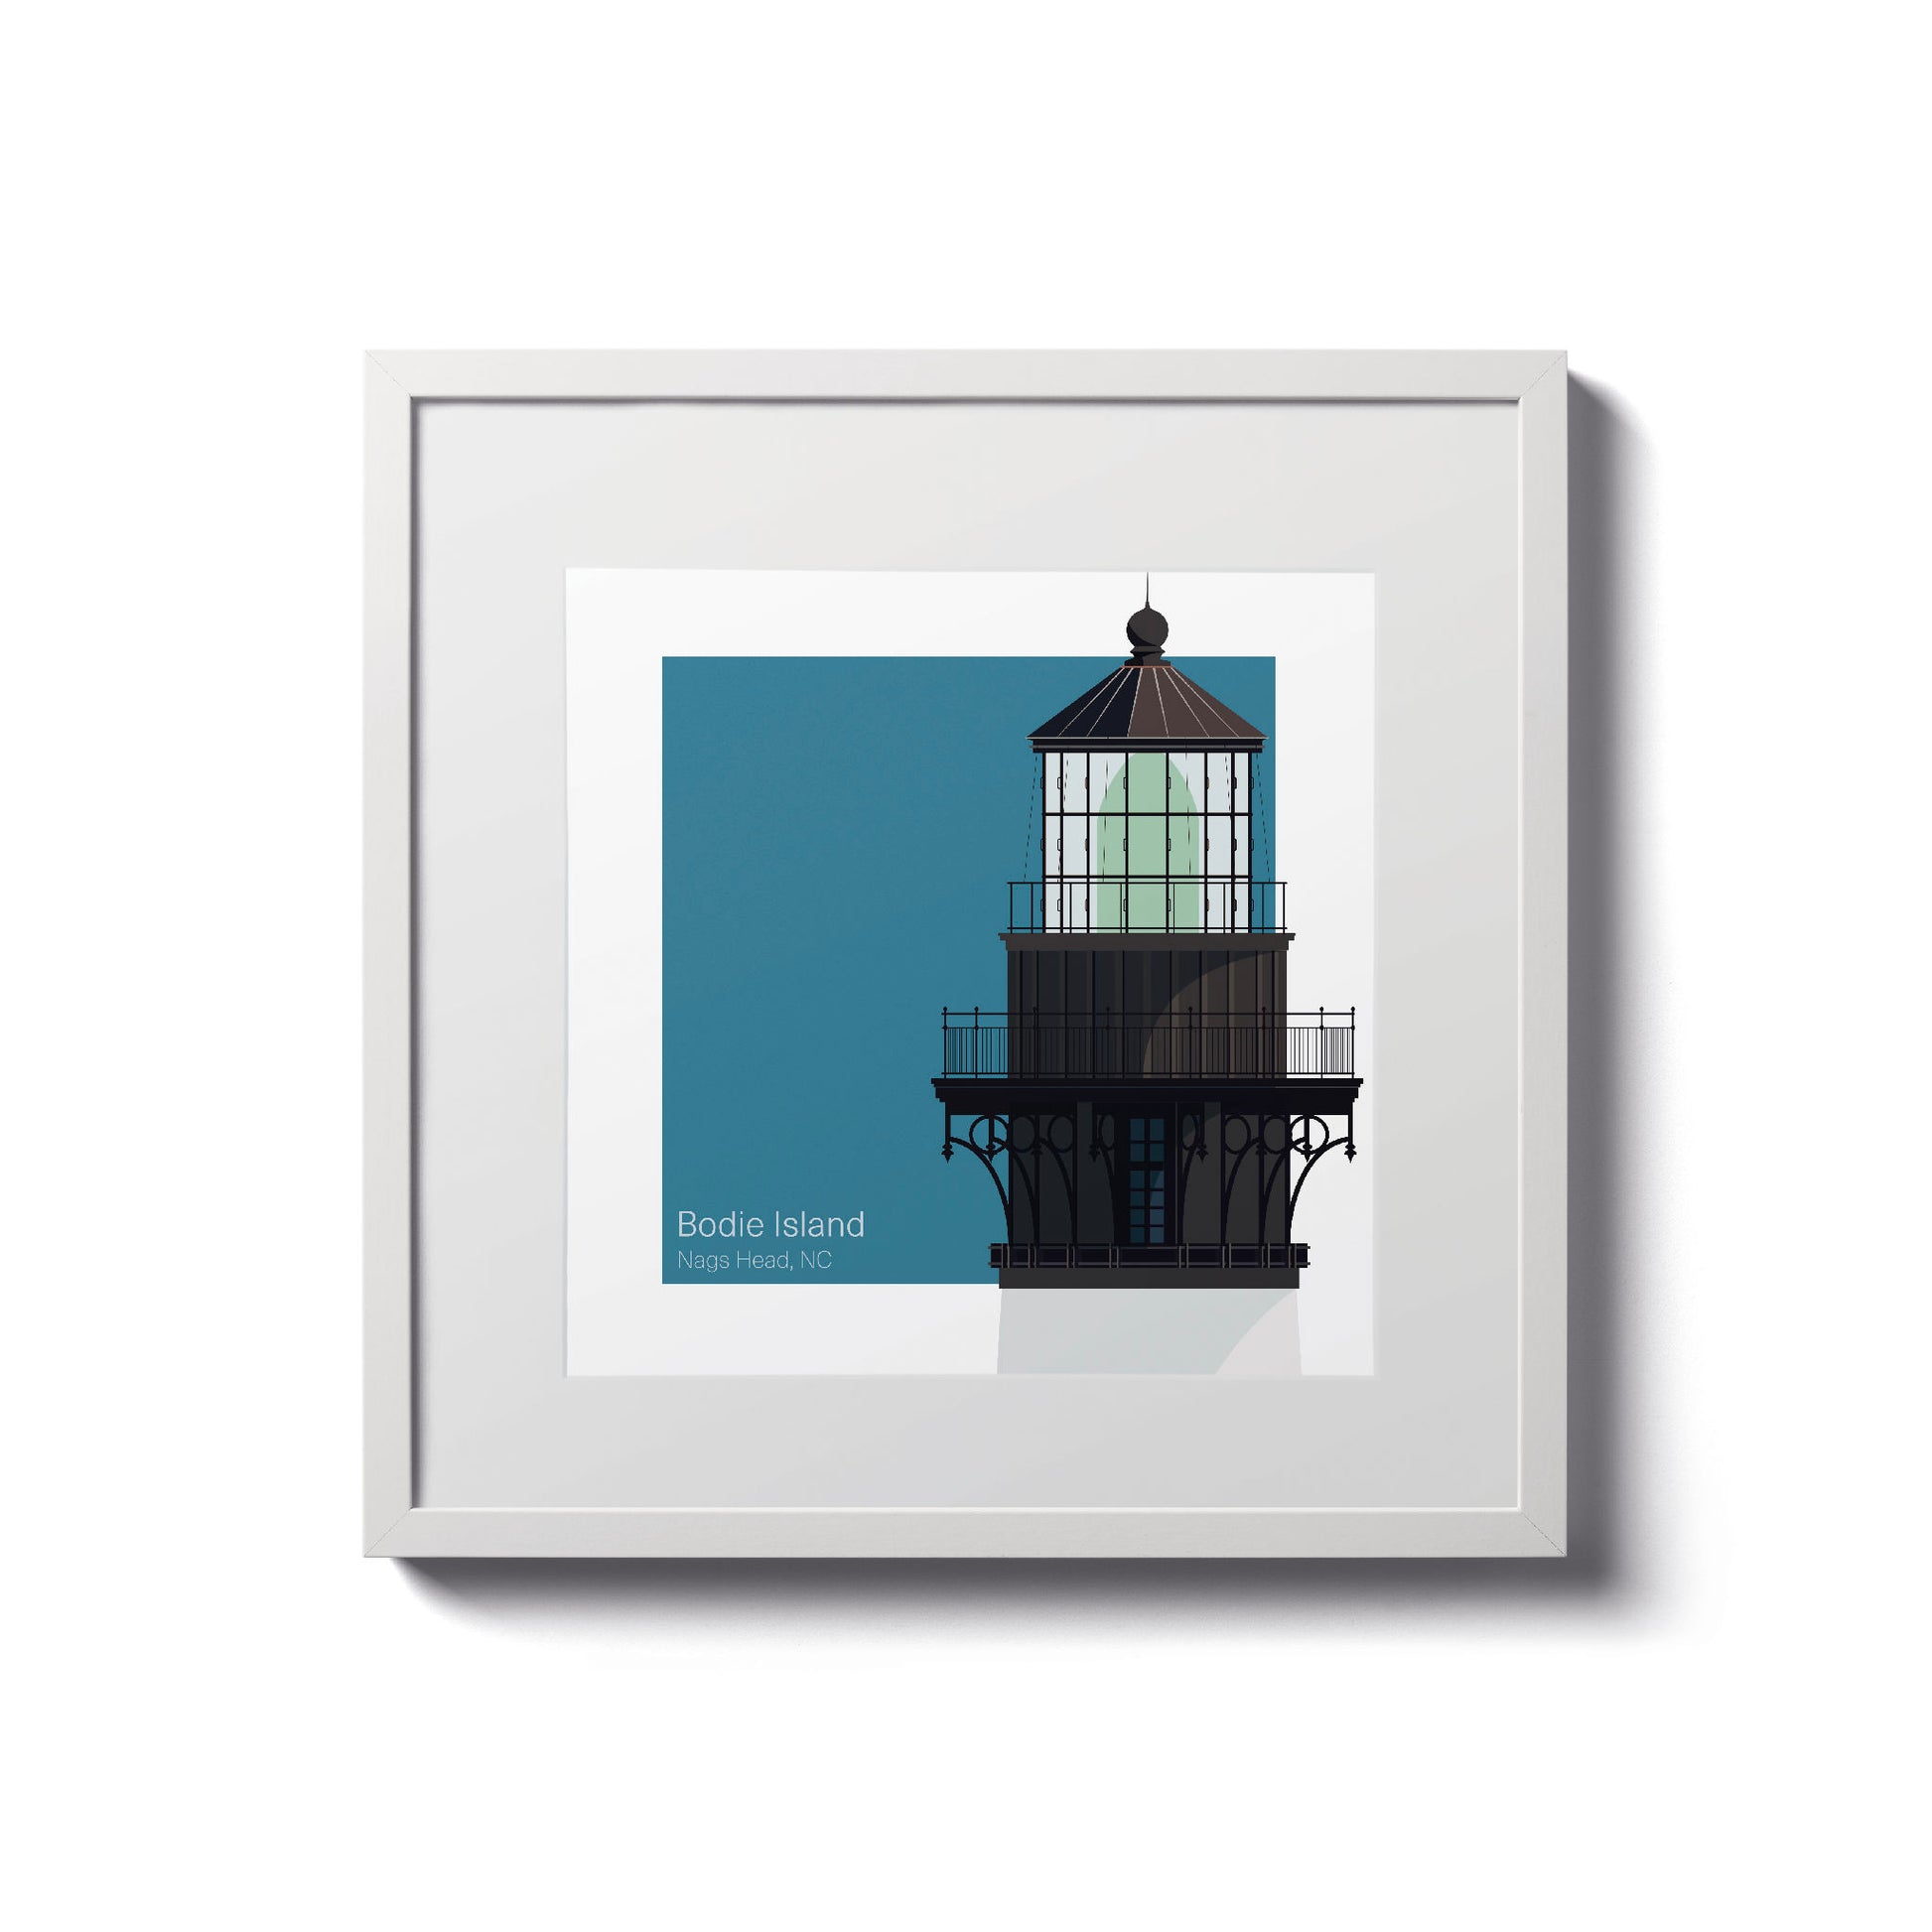 Illustration of the Bodie Island lighthouse, NC, USA. On a white background with aqua blue square as a backdrop., in a white frame  and measuring 8"x8" (20x20cm).